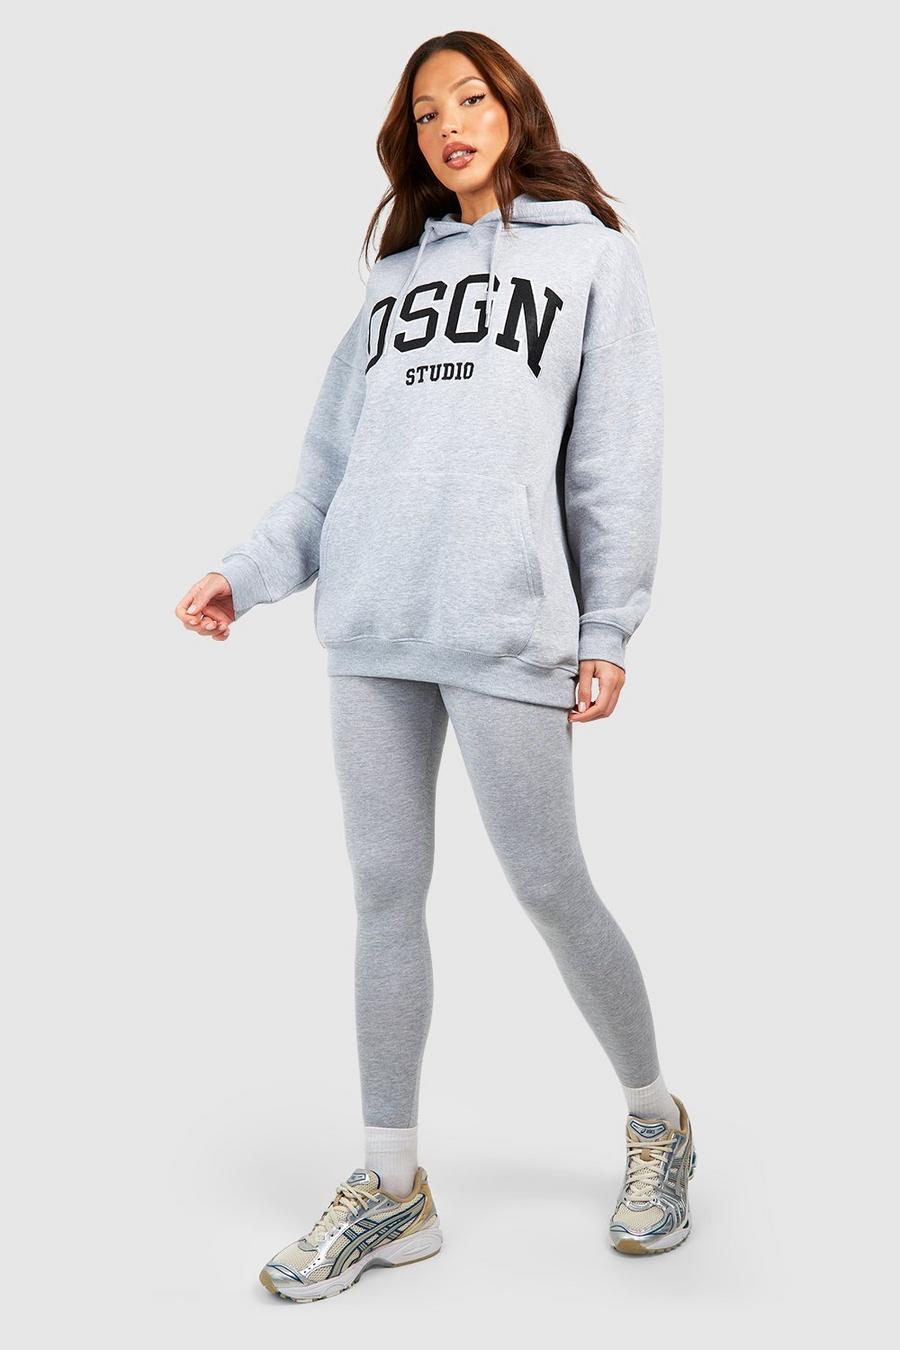 Grey marl Tall Dsgn Studio Emroidered Hoodie And Legging Set image number 1